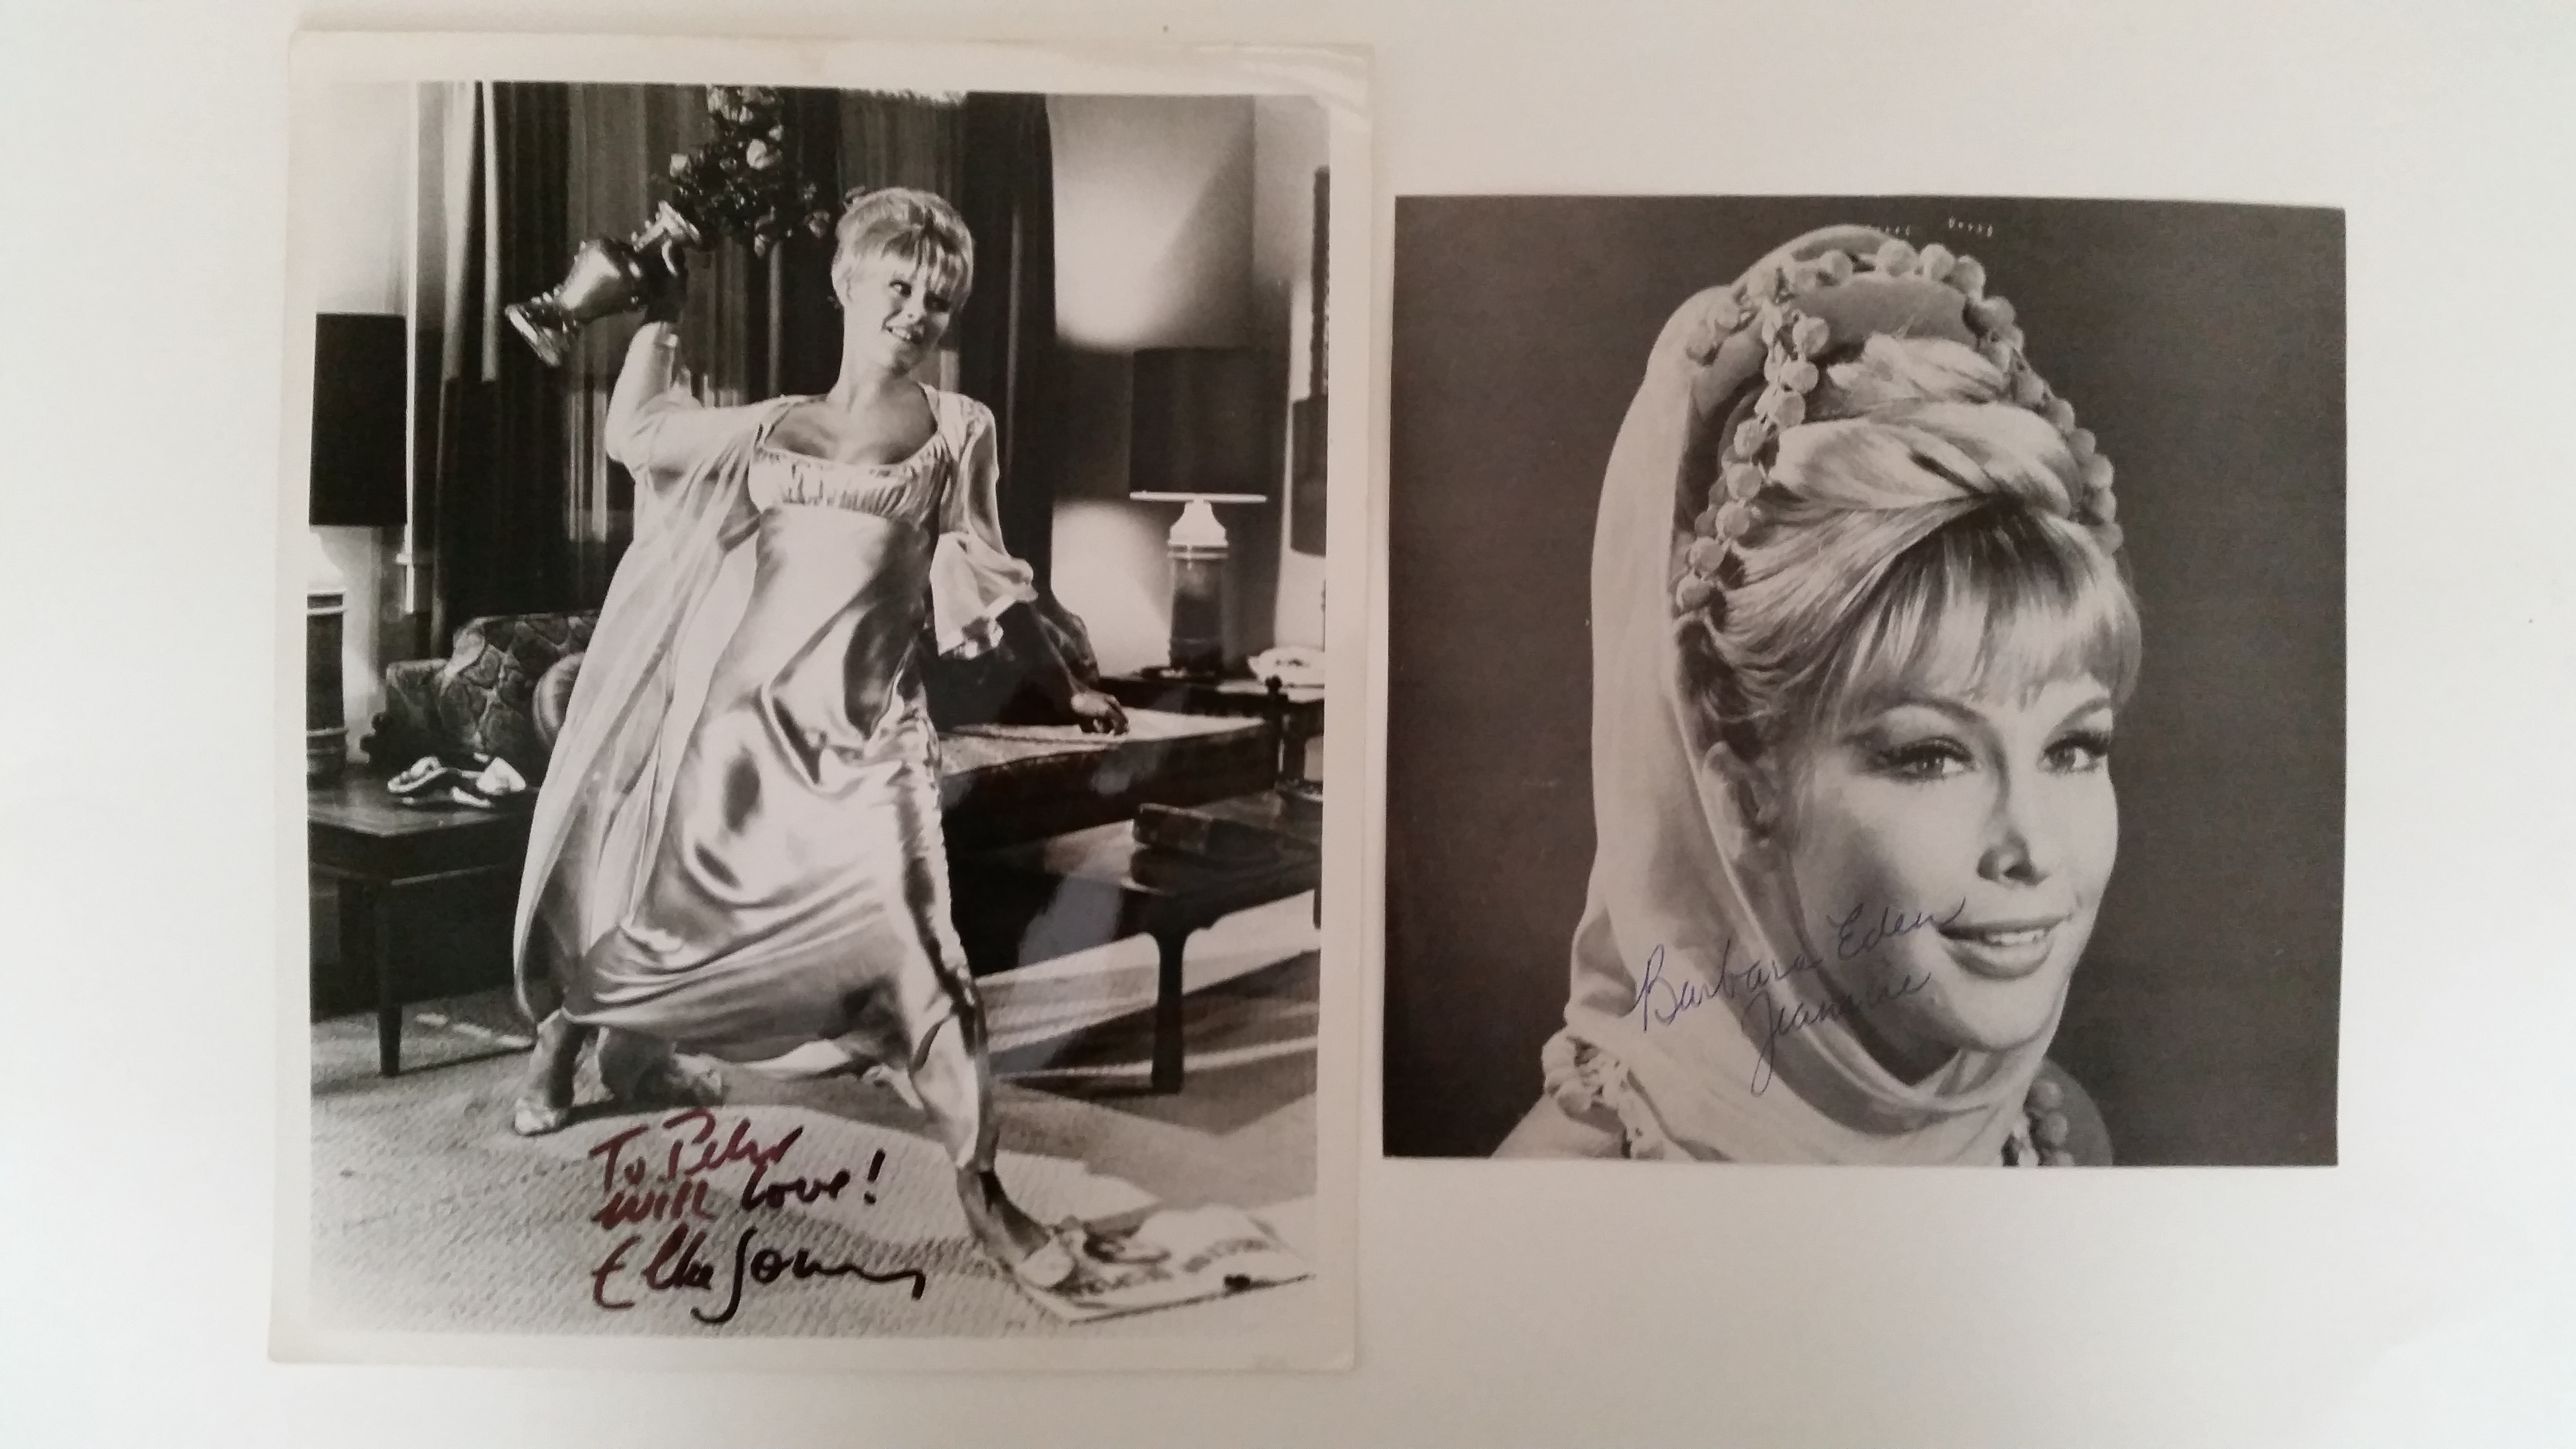 CINEMA, signed selection, inc. photo by Elke Sommer; magazine cutting by Barbara Eden, 8 x 10 and